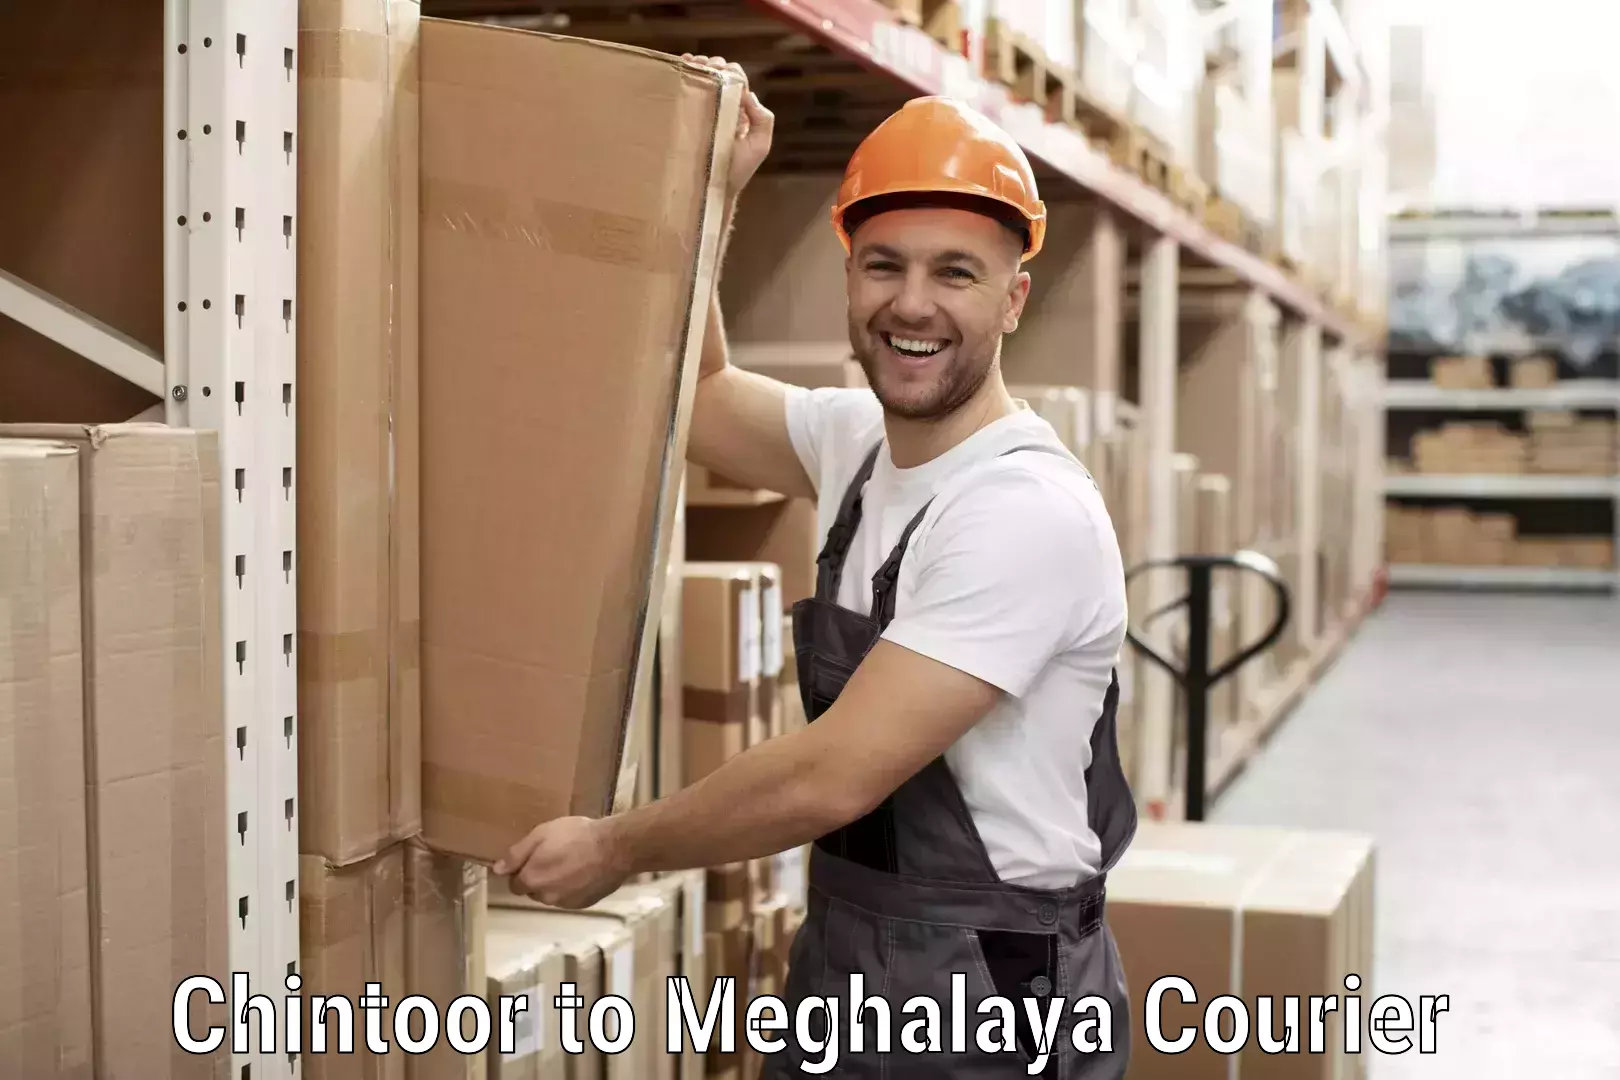 Easy access courier services Chintoor to Meghalaya